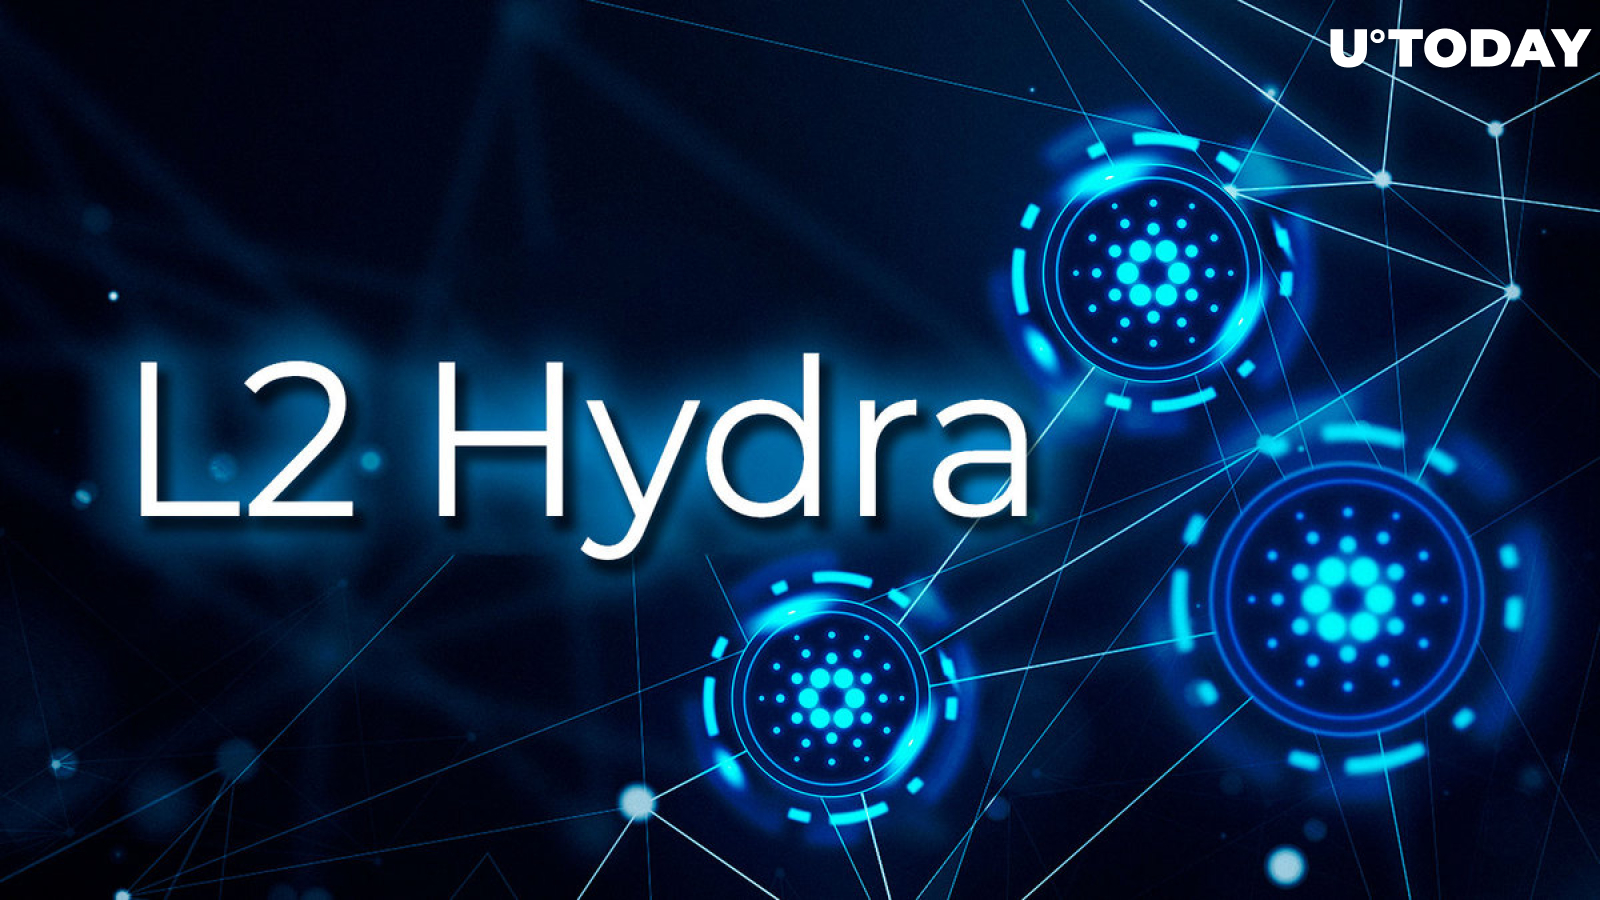 Cardano's L2 Hydra New Version Released, Here's What Changed